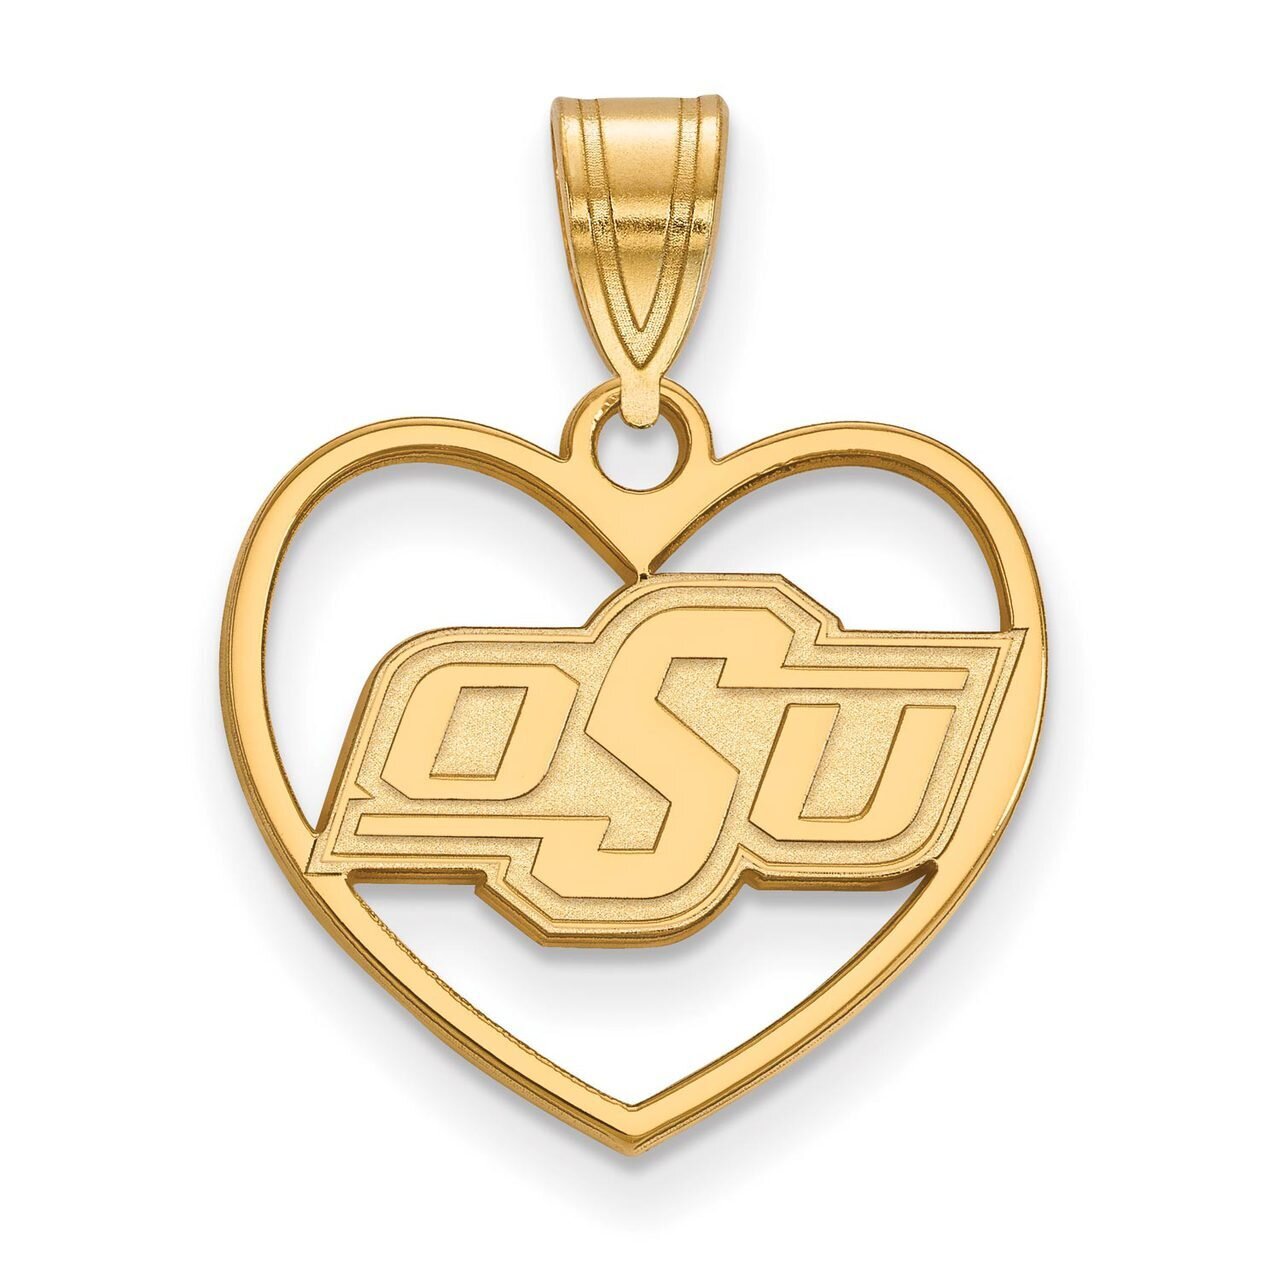 Oklahoma State University Pendant in Heart Gold-plated Silver GP016OKS